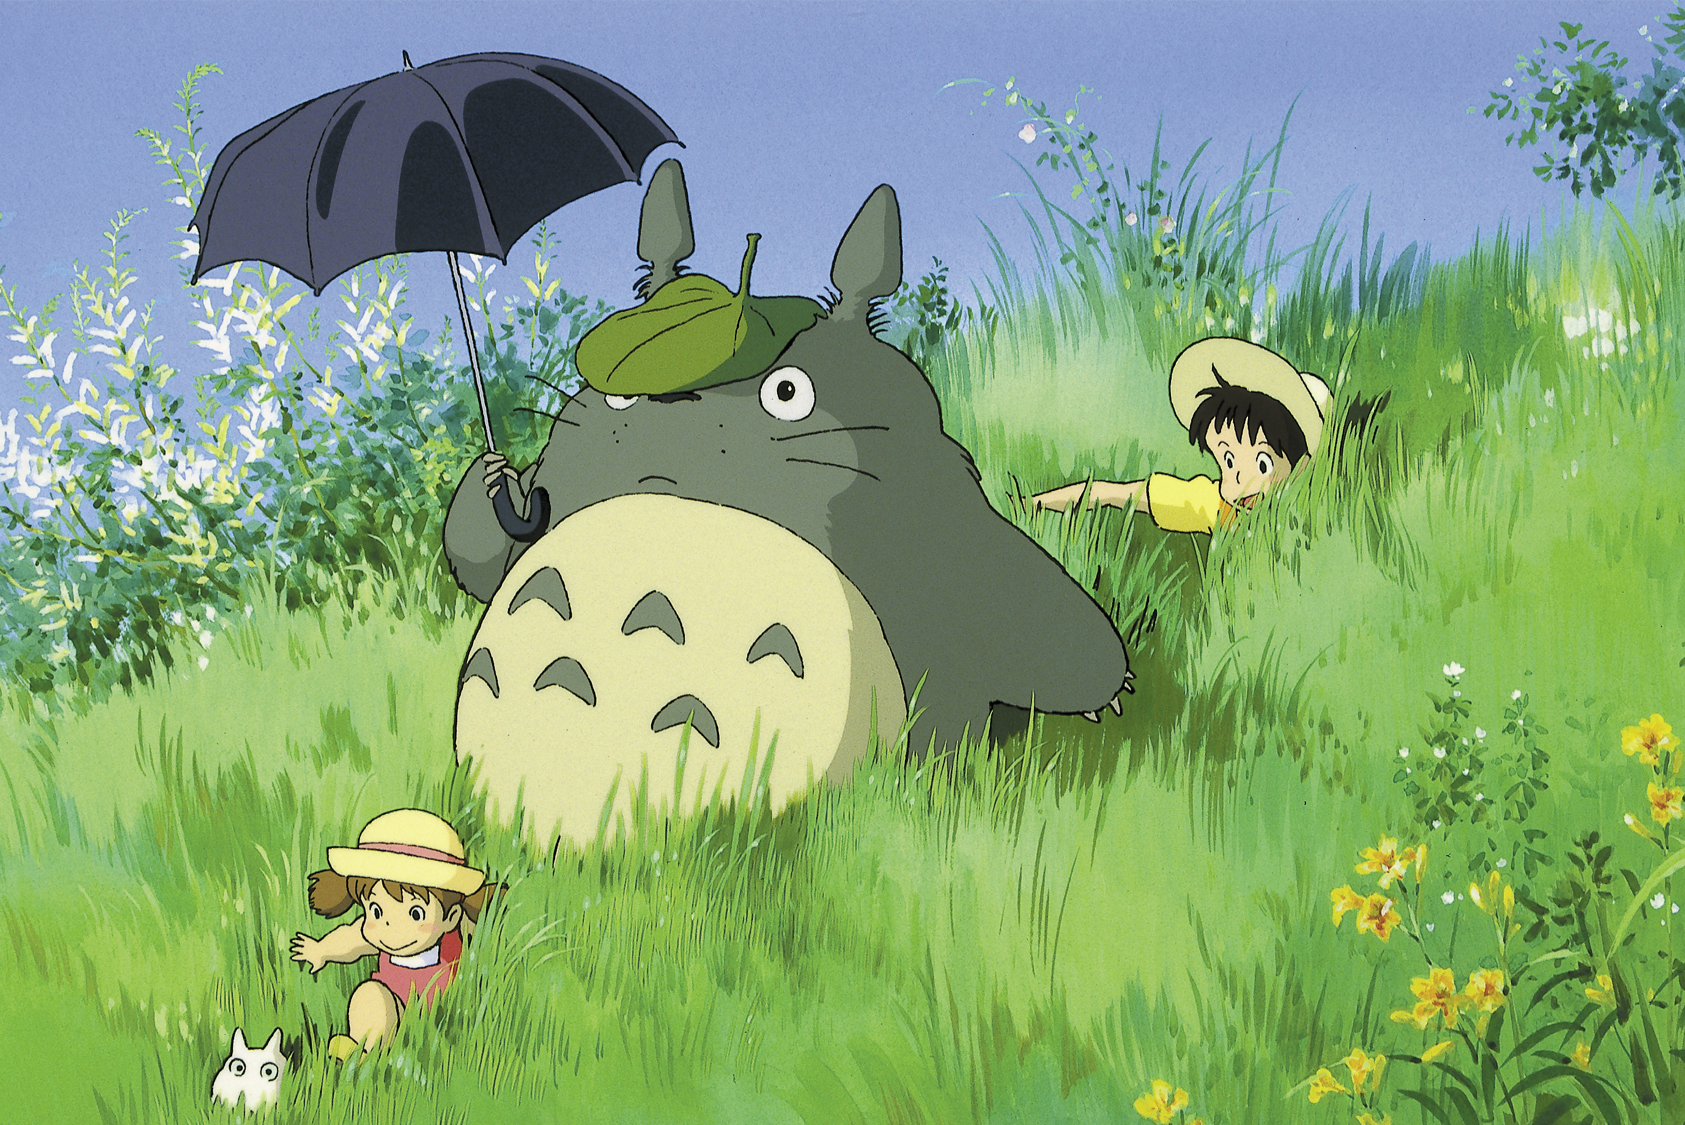 The best Studio Ghibli movies of all time